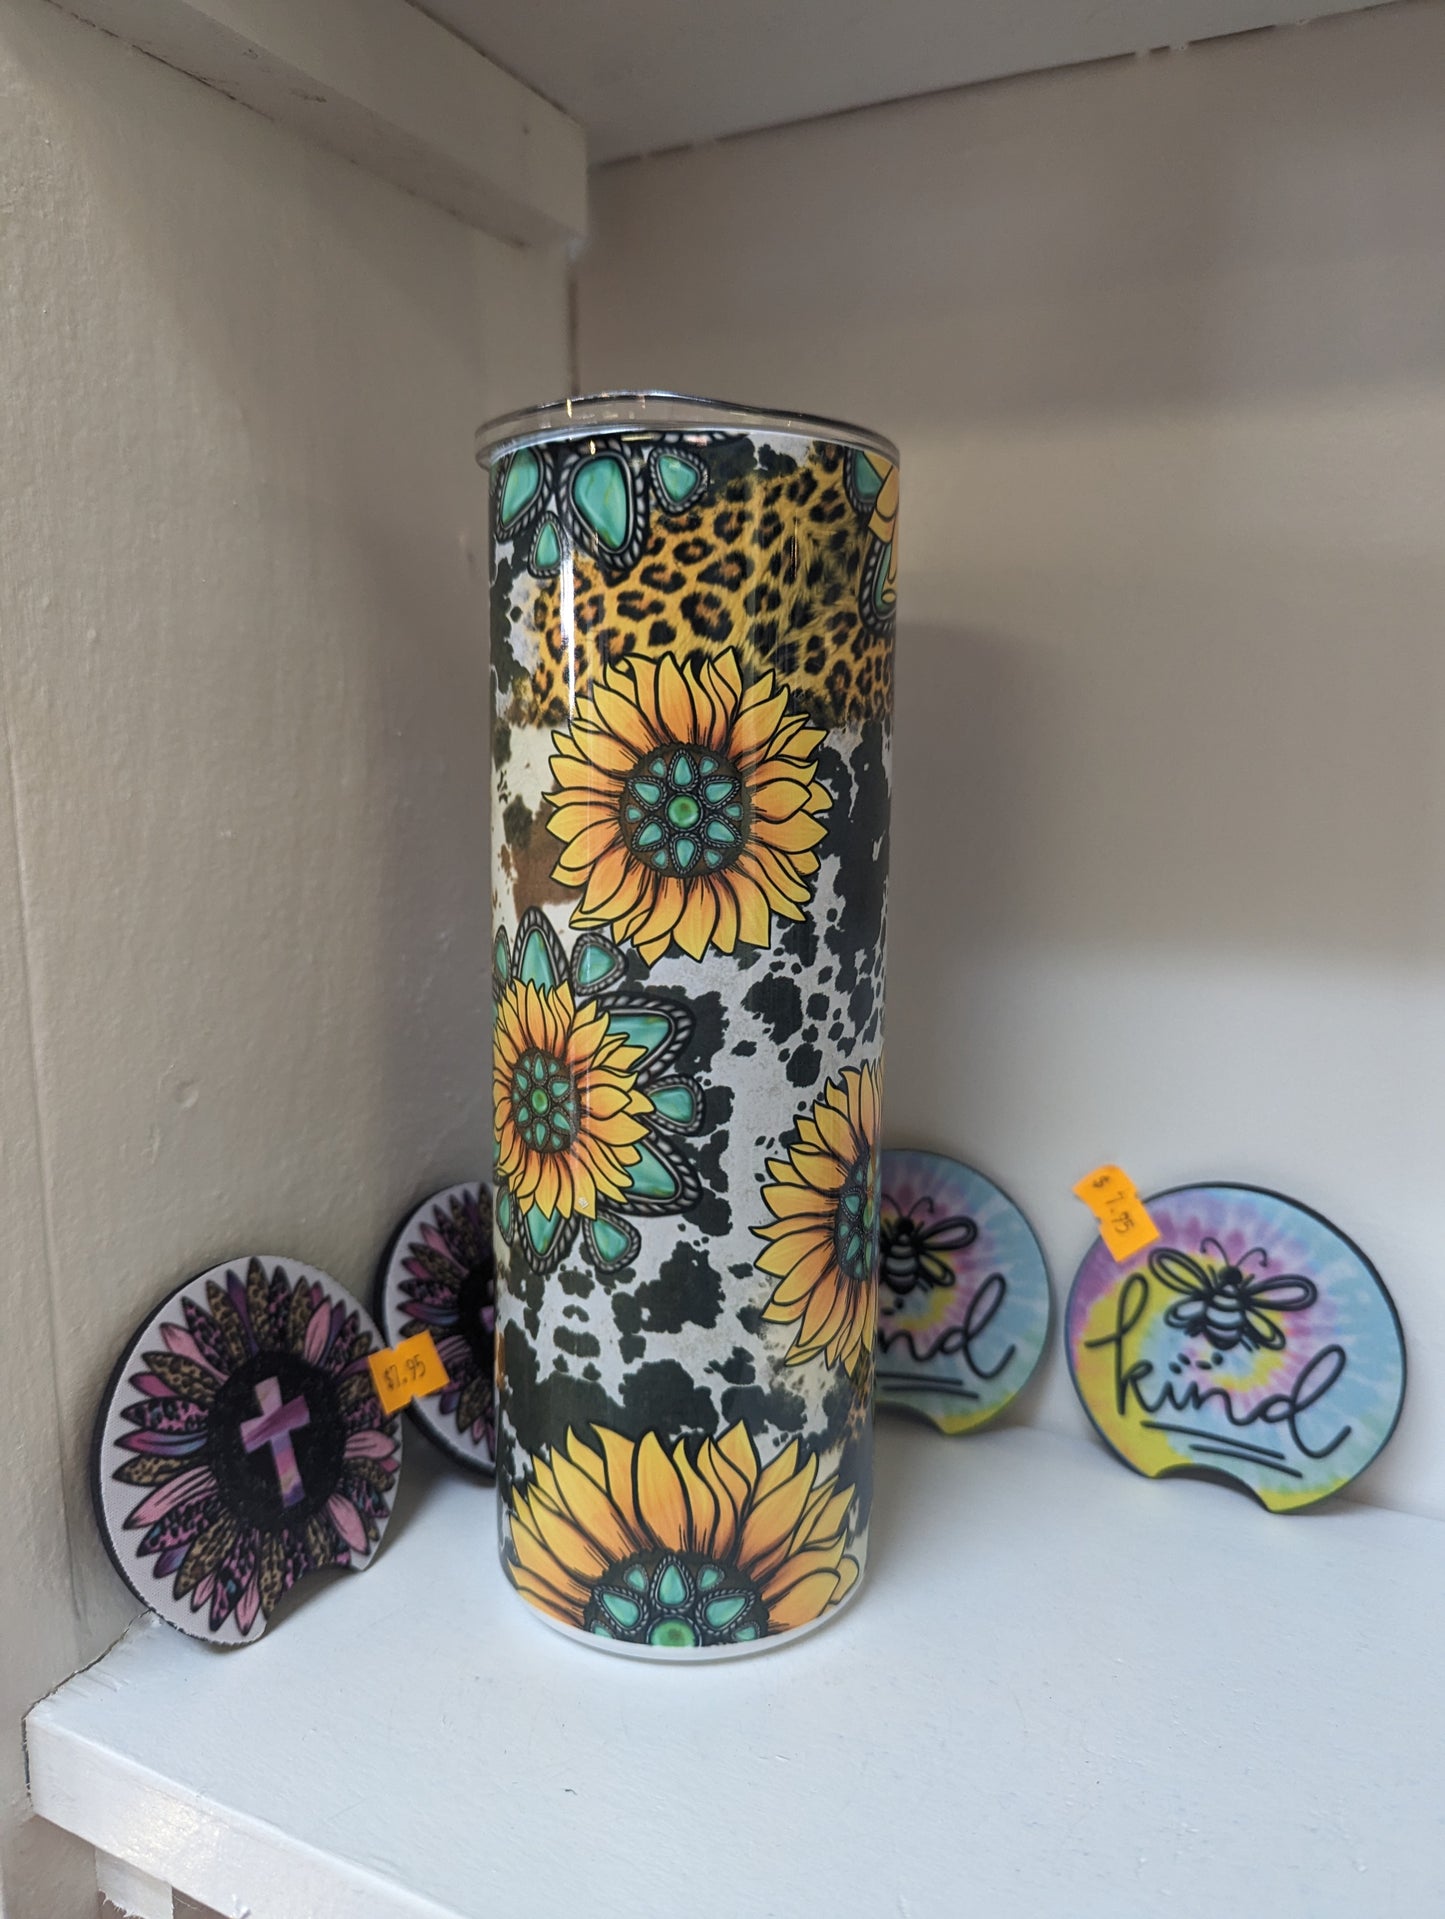 Sunflowers with cow print and teal gems